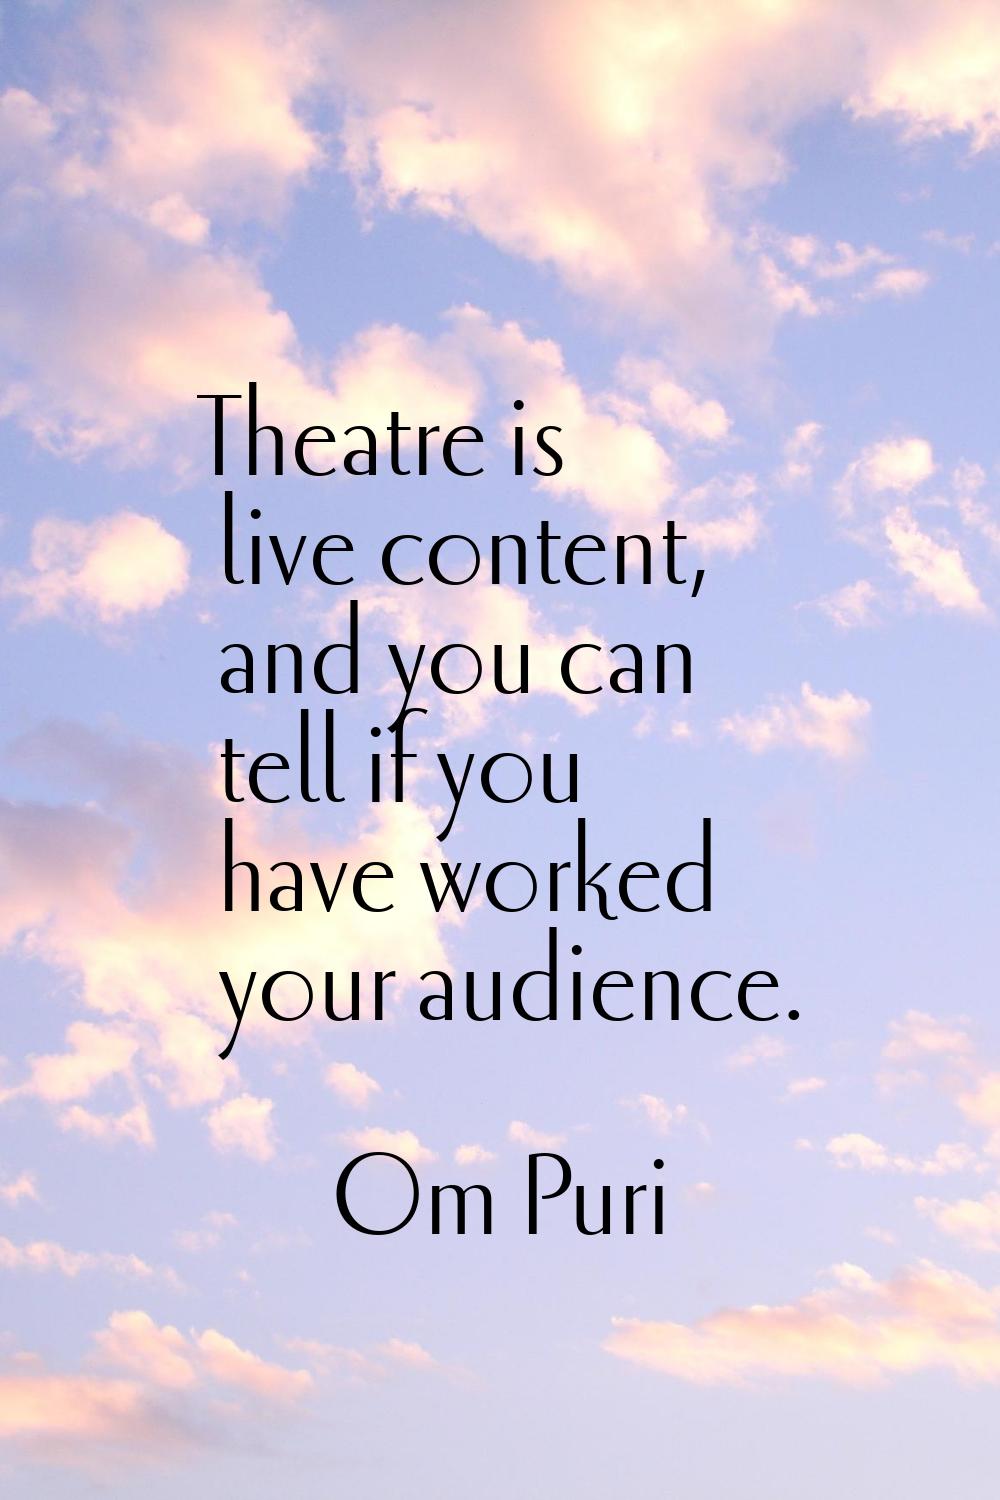 Theatre is live content, and you can tell if you have worked your audience.